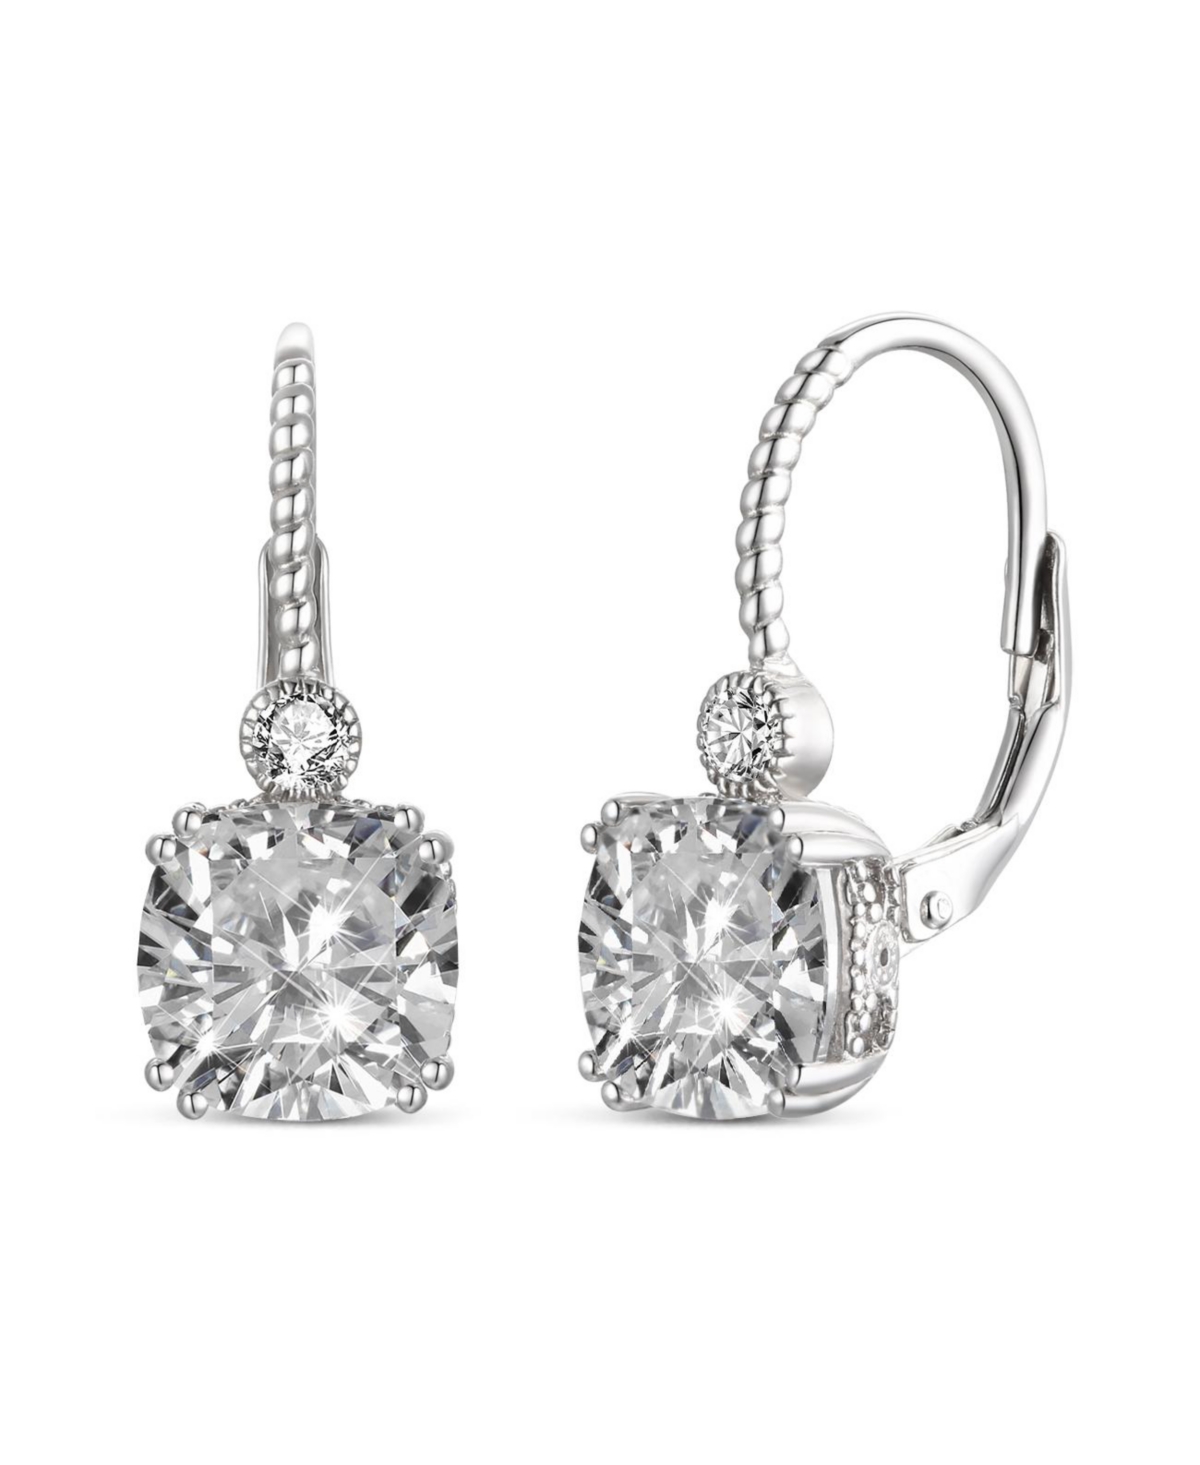 Sterling Silver White Gold Plating Cubic Zirconia Leverback Drop Earrings - Silver